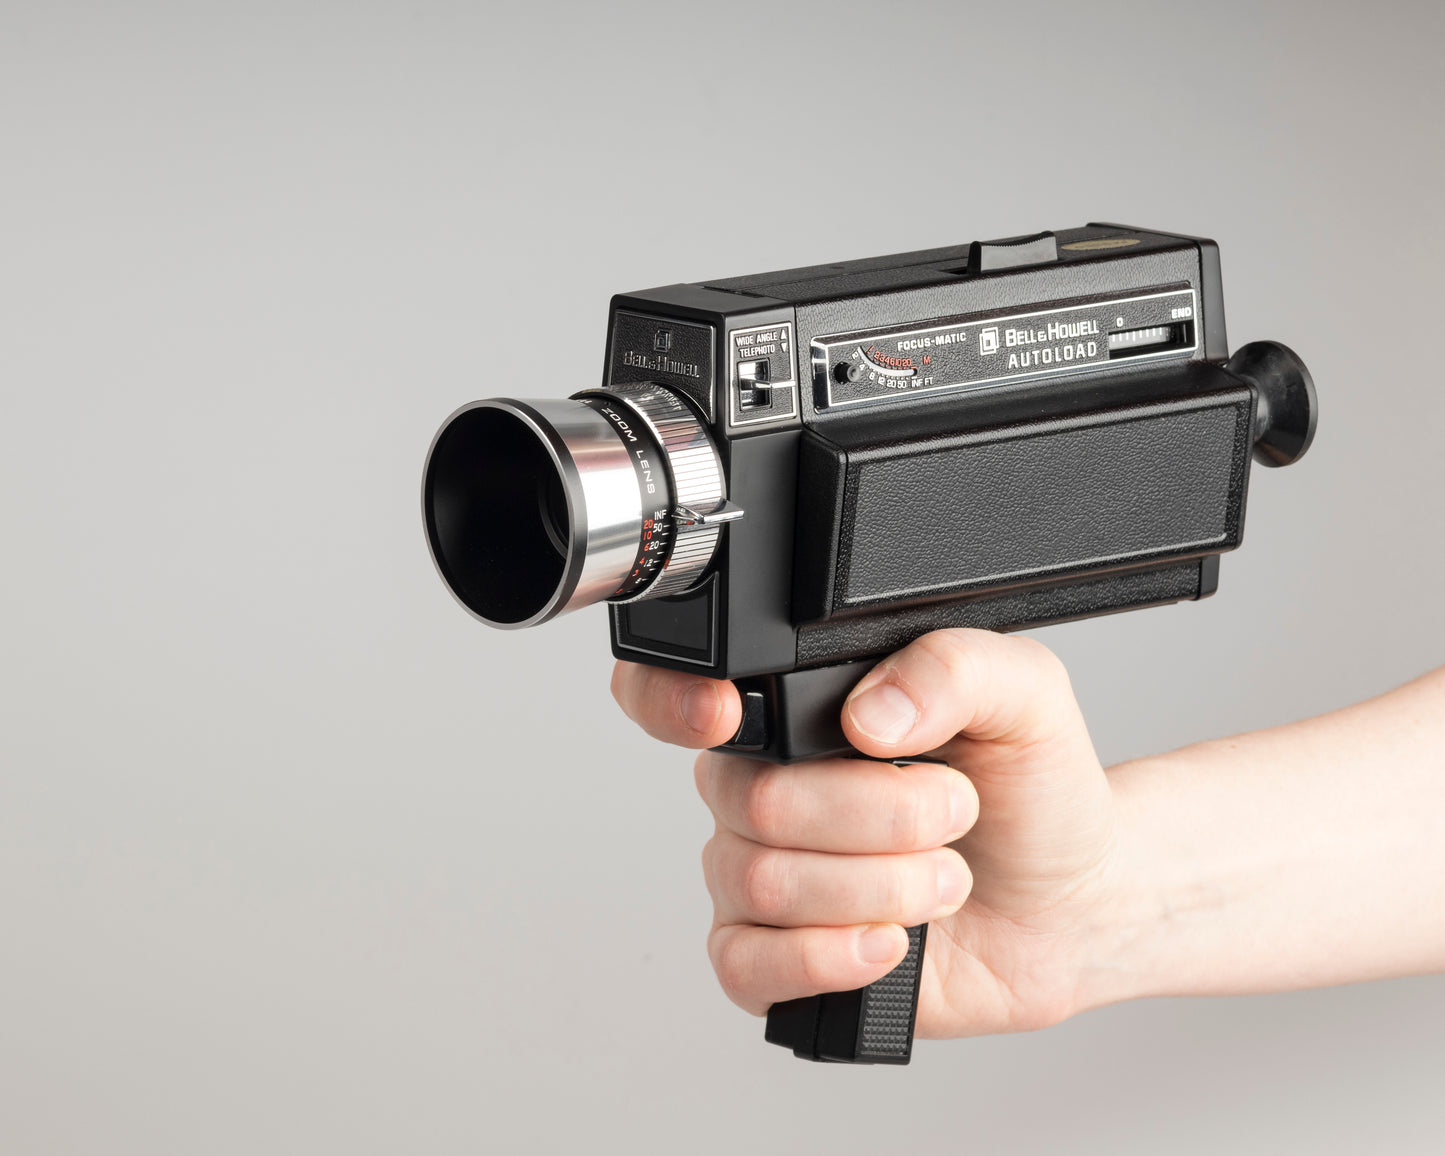 Bell and Howell 492 Super 8 movie camera